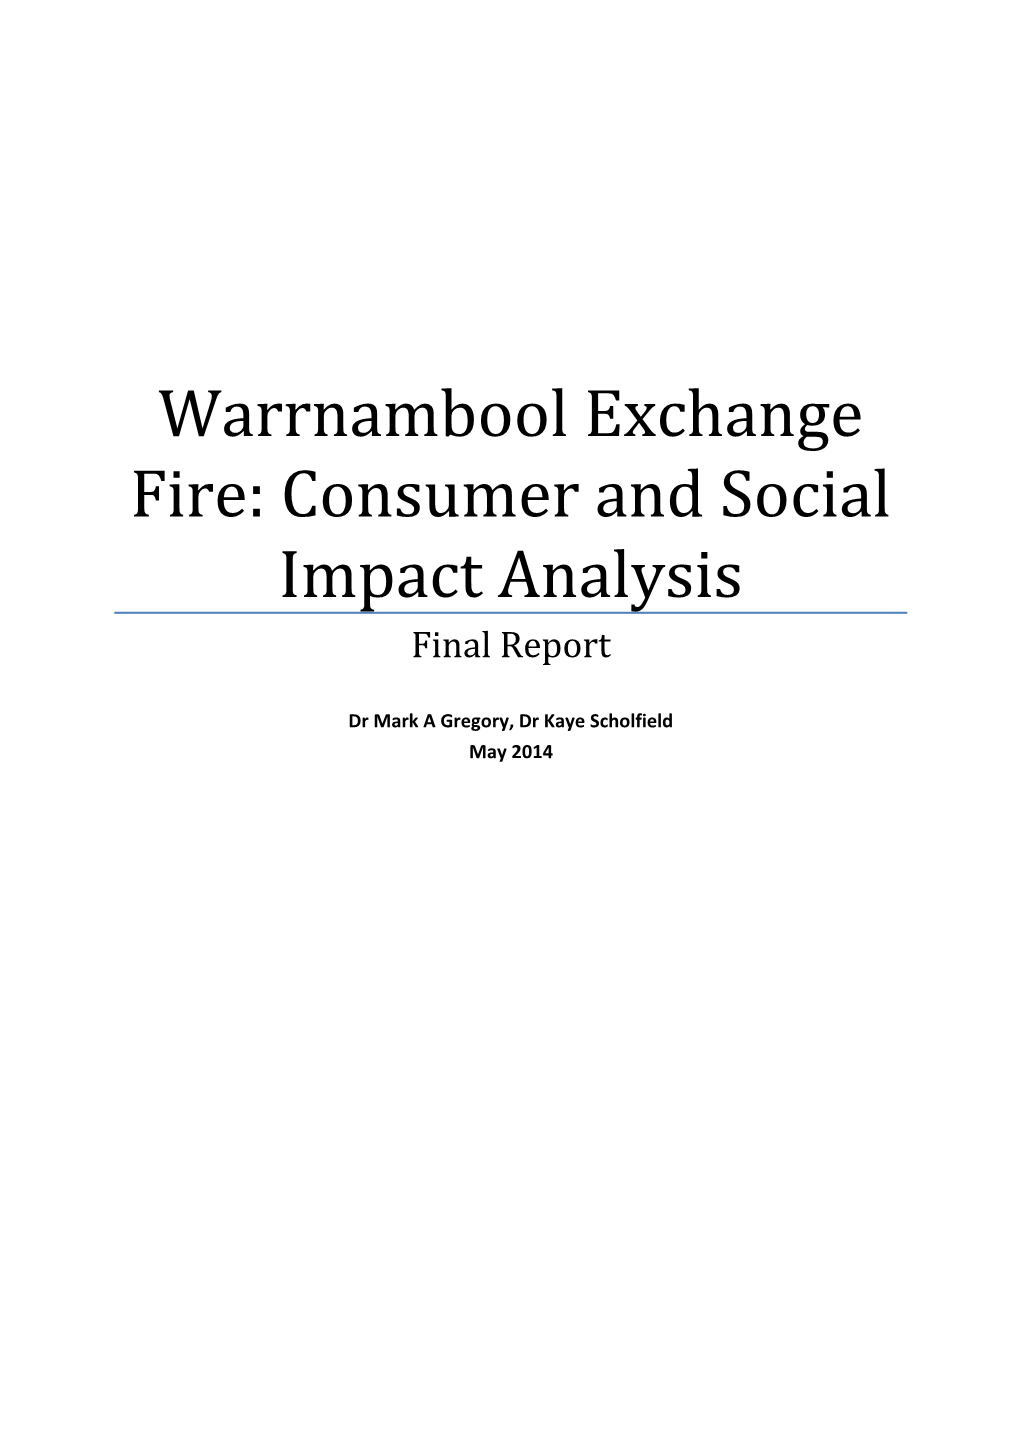 Warrnambool Exchange Fire Consumer and Social Impact Analysis